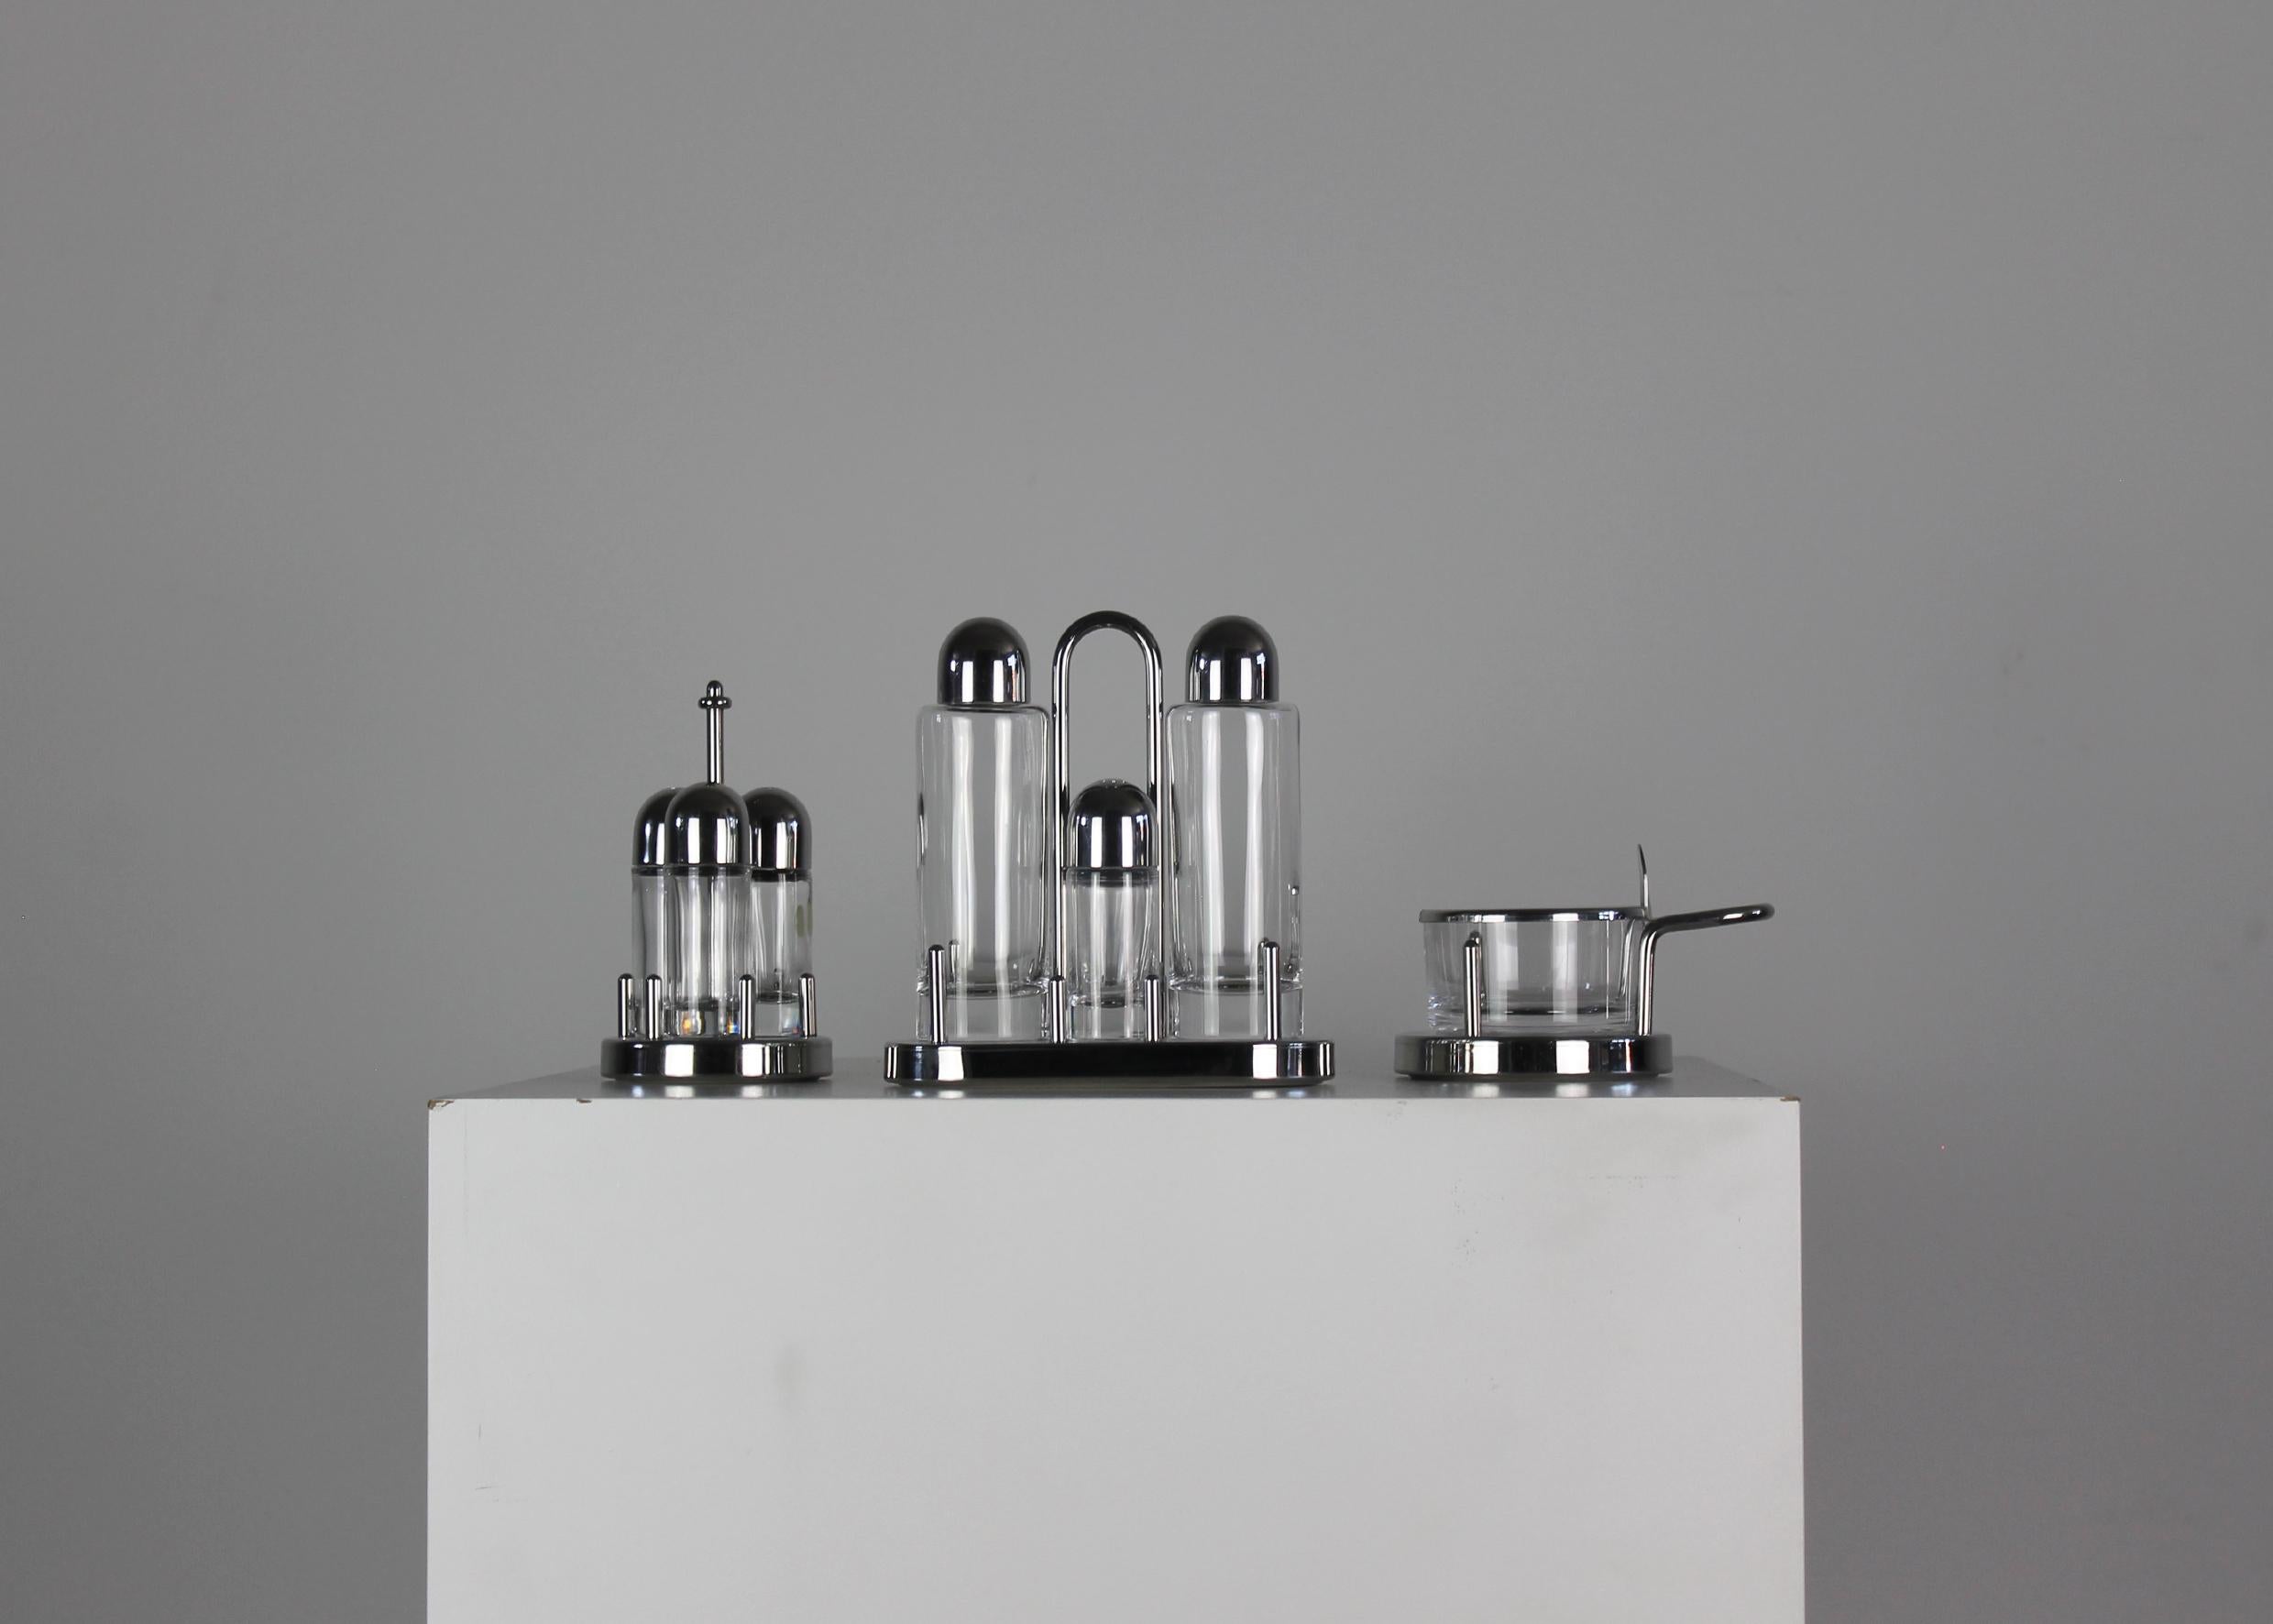 Cruet set composed of one complete set with an oil jug, vinegar jug, salt and pepper shaker, one set with three spices shakers, and a cheese pot, each piece was realized in glass and stainless steel.
This cruet set was designed by Ettore Sottsass in